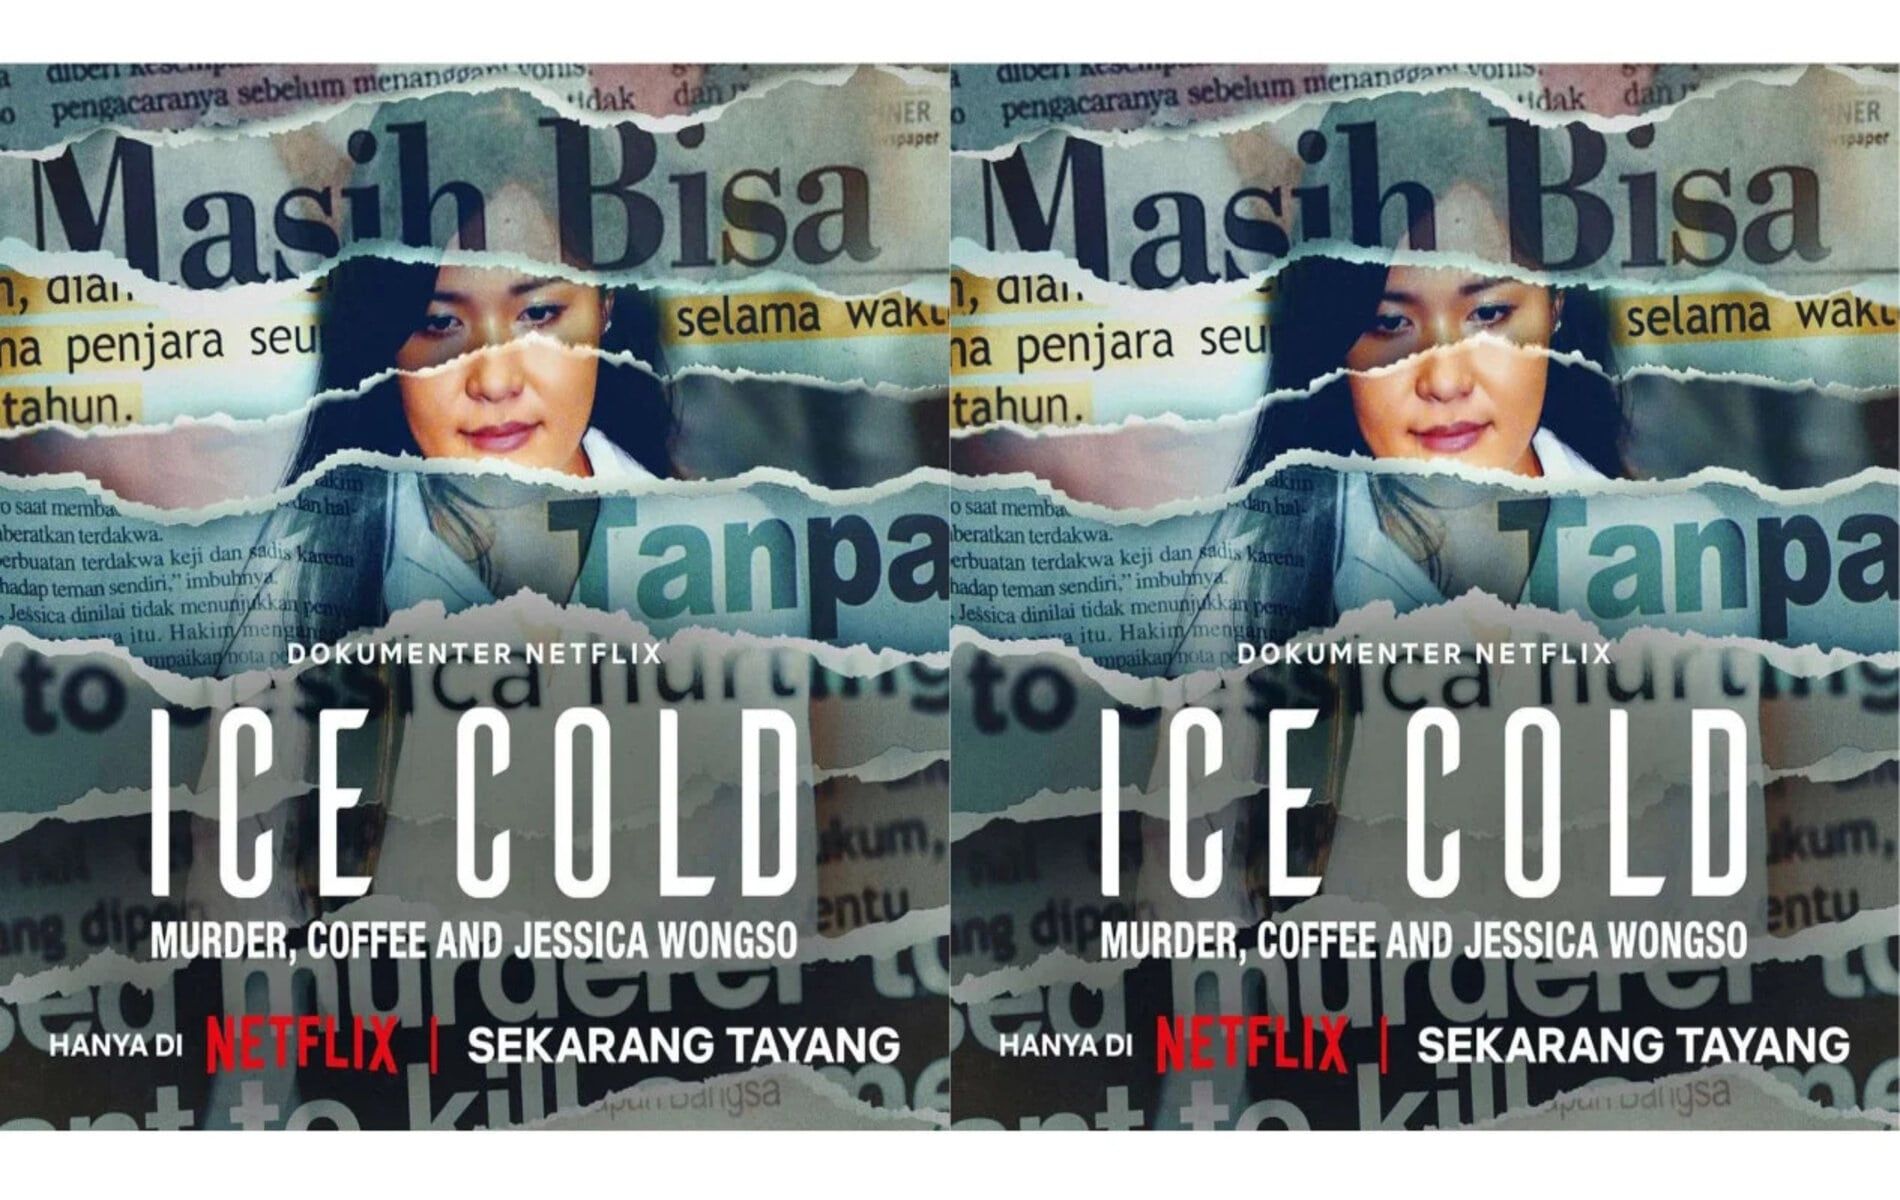 Film dokumenter Ice Cold: Murder, Coffee, and Jessica Wongso.